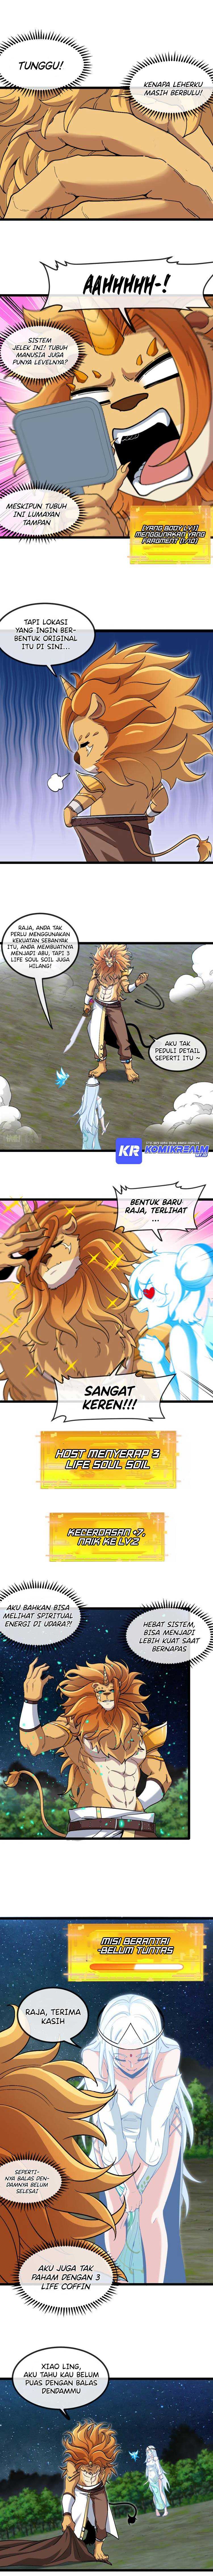 The Golden Lion King Chapter 05